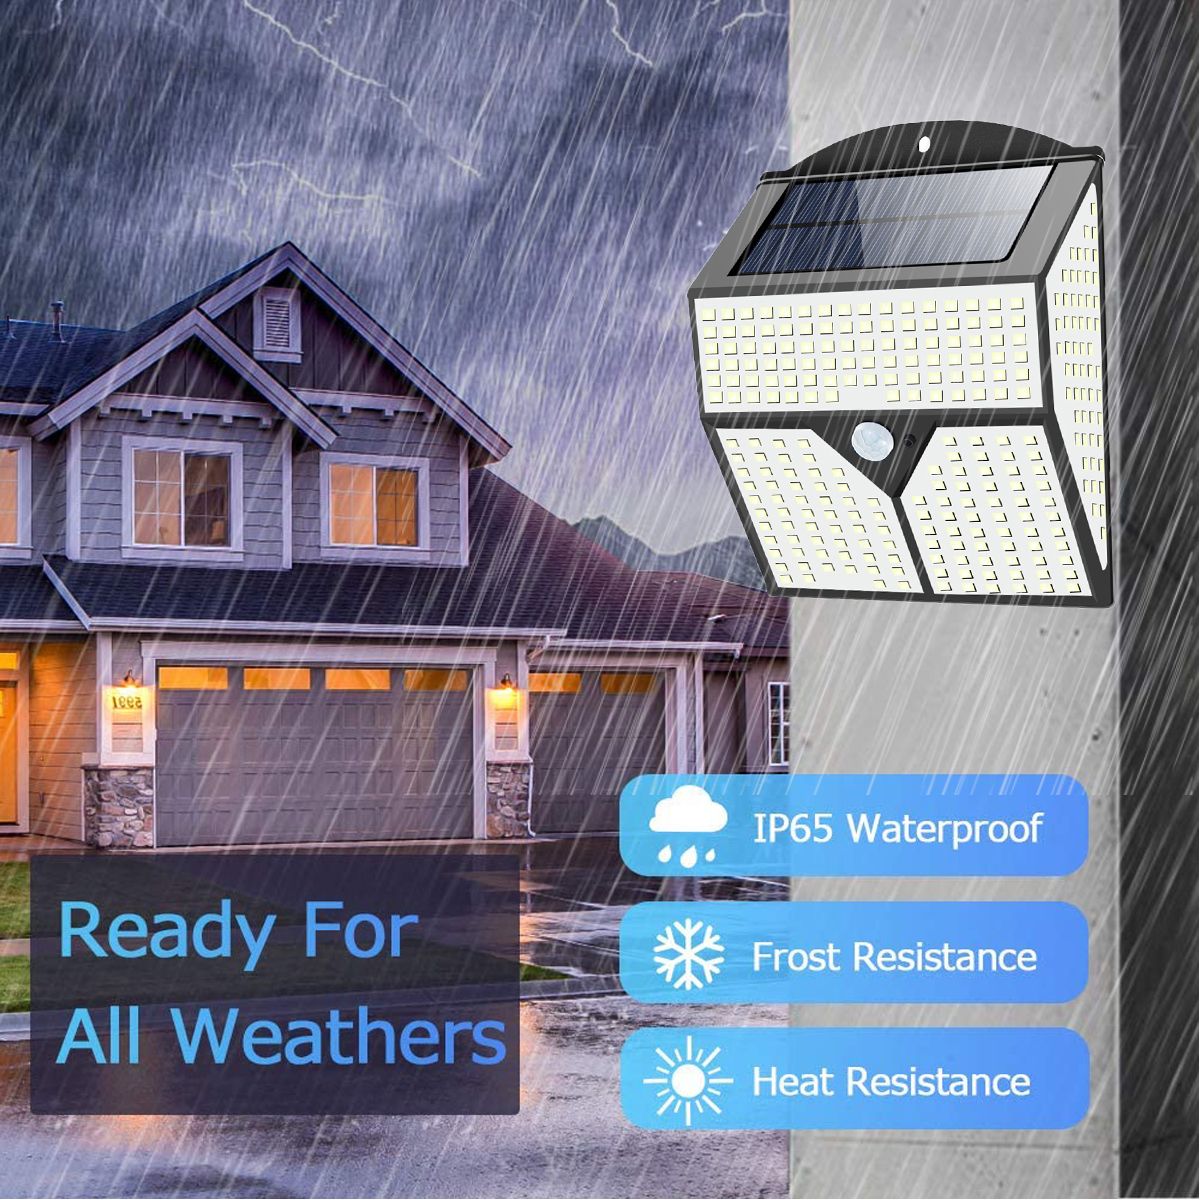 318LED-Solar-Light-Infrared-Motion-Sensor-Garden-Security-Wall-Lamp-for-Outdoor-Yard-Patio-1735603